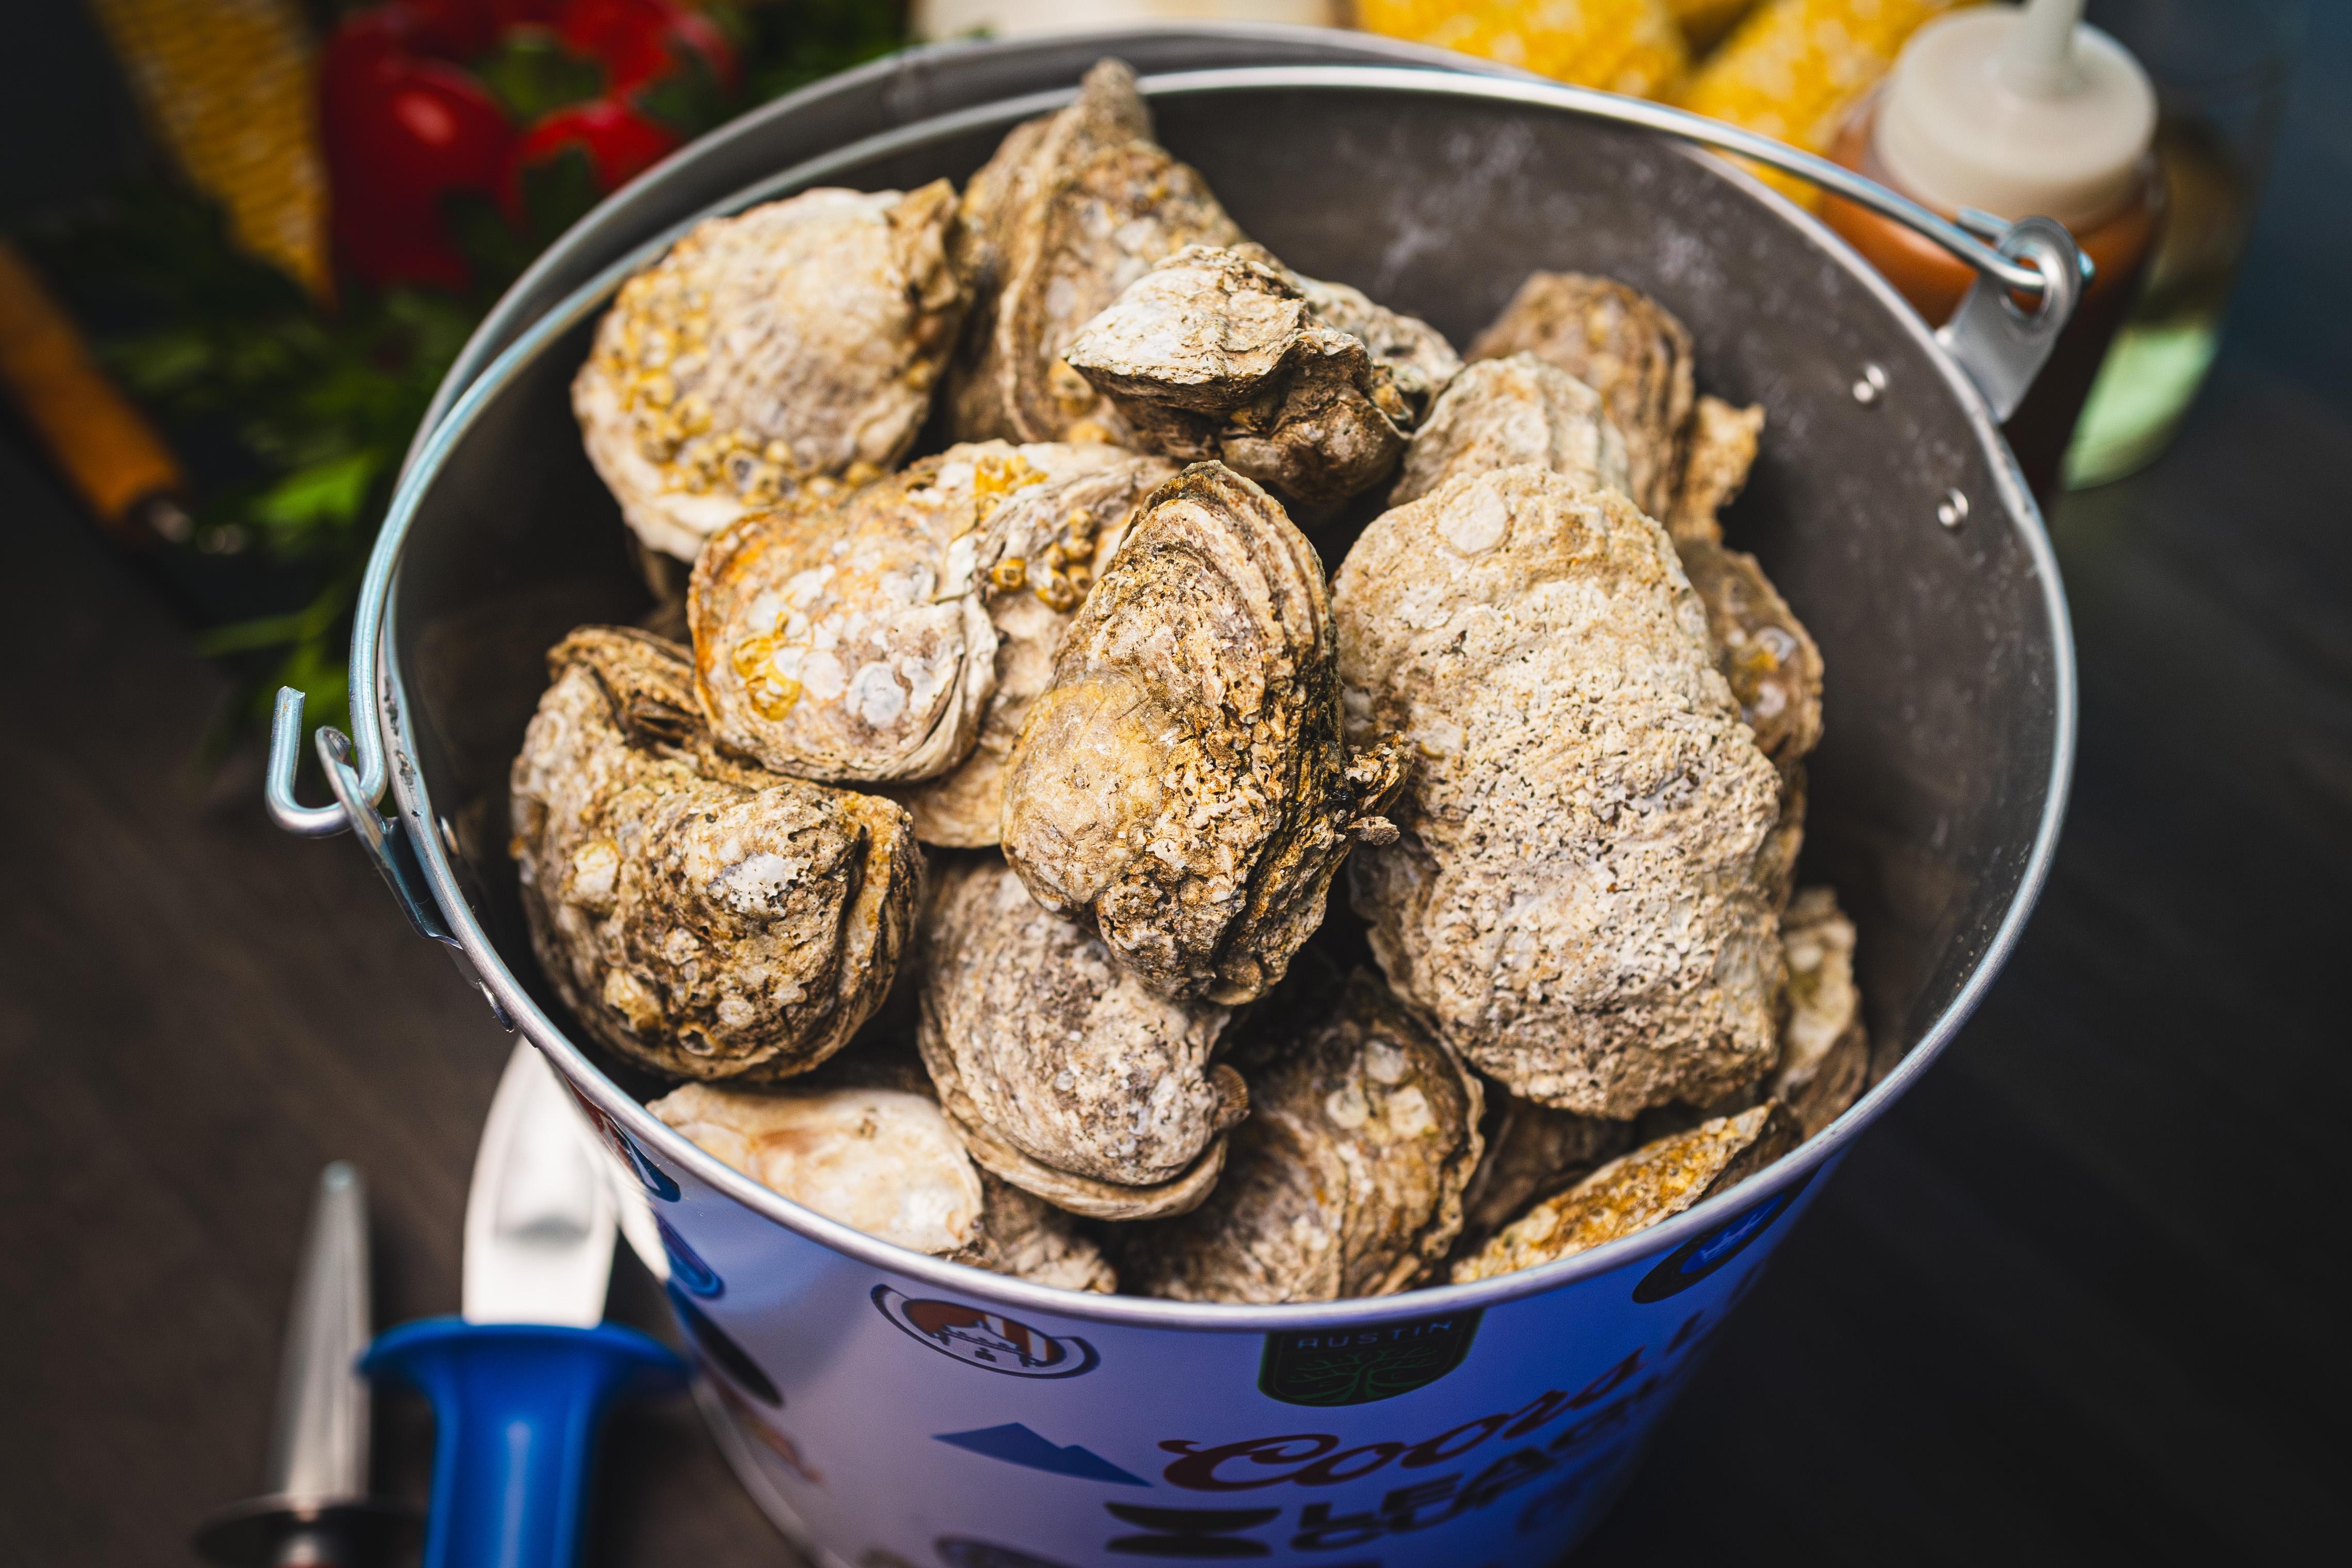 Bucket Of Steamed Oysters